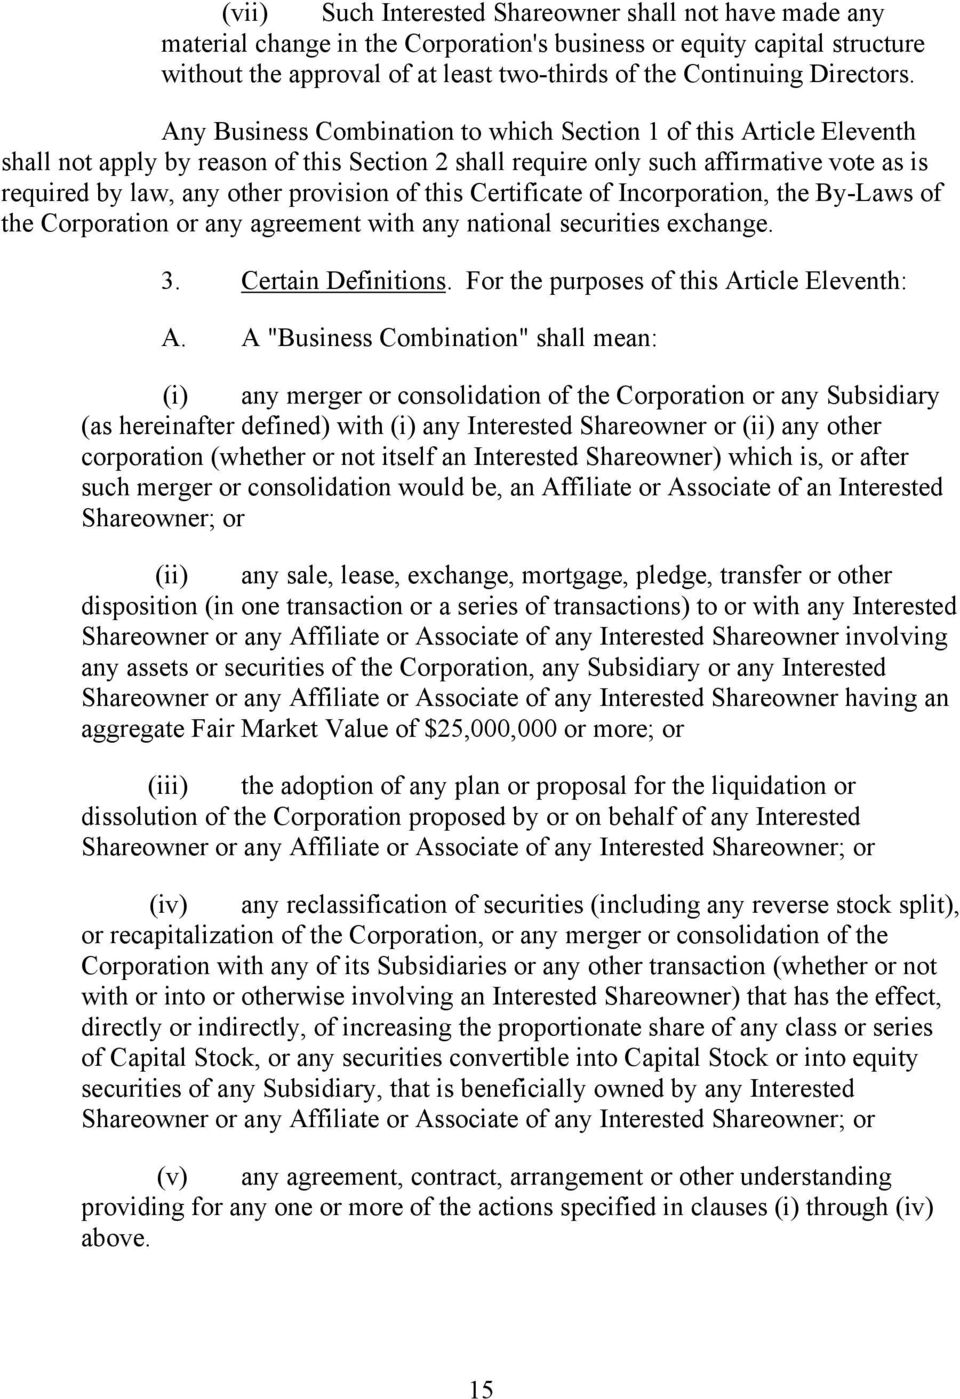 Any Business Combination to which Section 1 of this Article Eleventh shall not apply by reason of this Section 2 shall require only such affirmative vote as is required by law, any other provision of